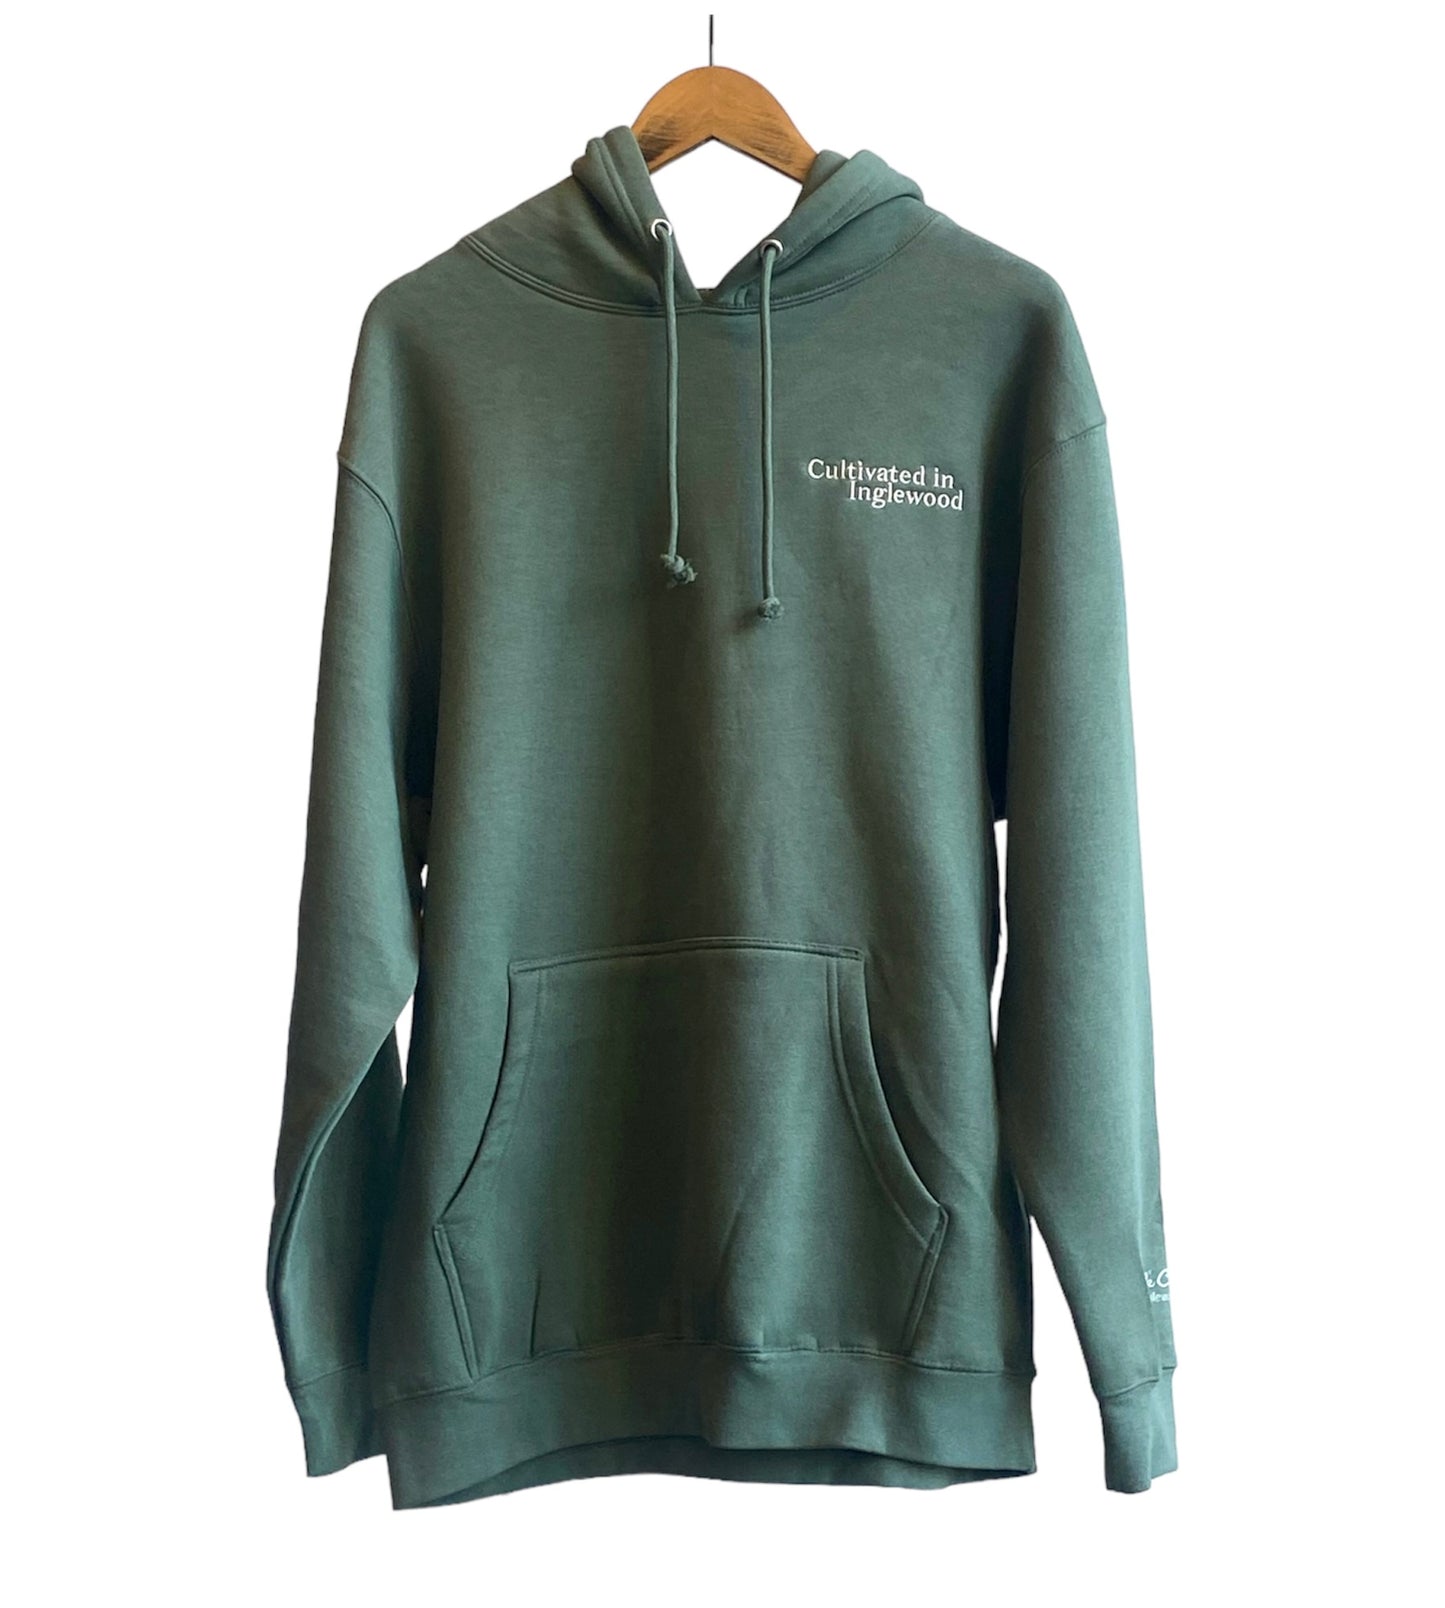 Cultivated in Inglewood Hooded Sweatshirt - sage/off white